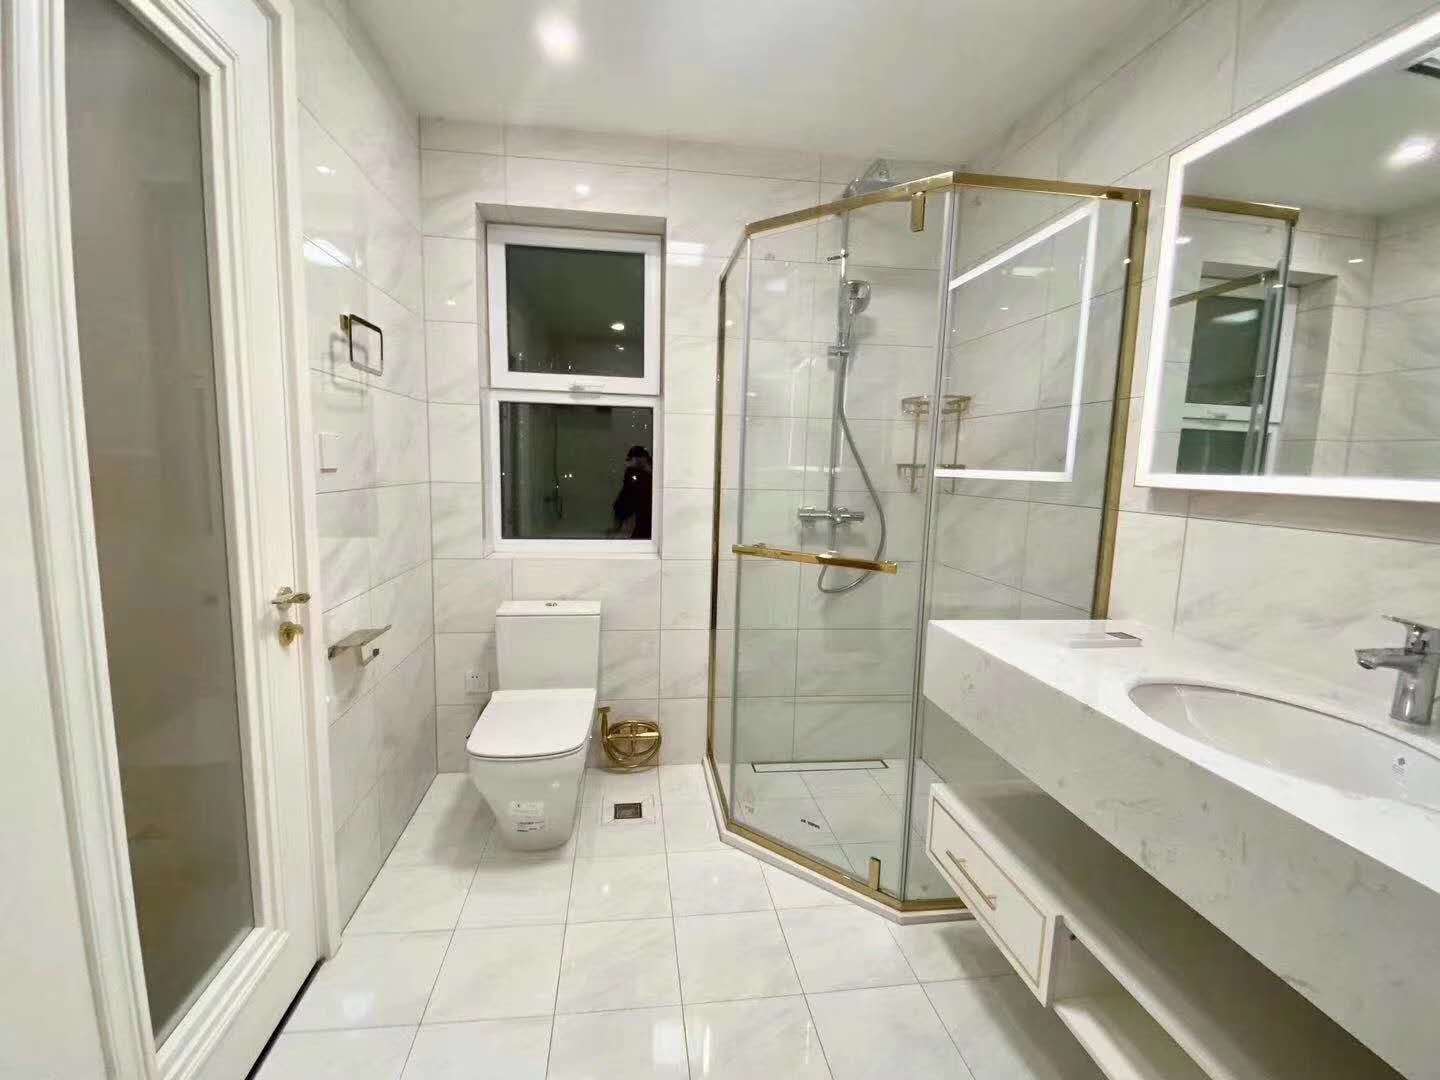 Marvelous shower enclosure maintenance knowledge is available here